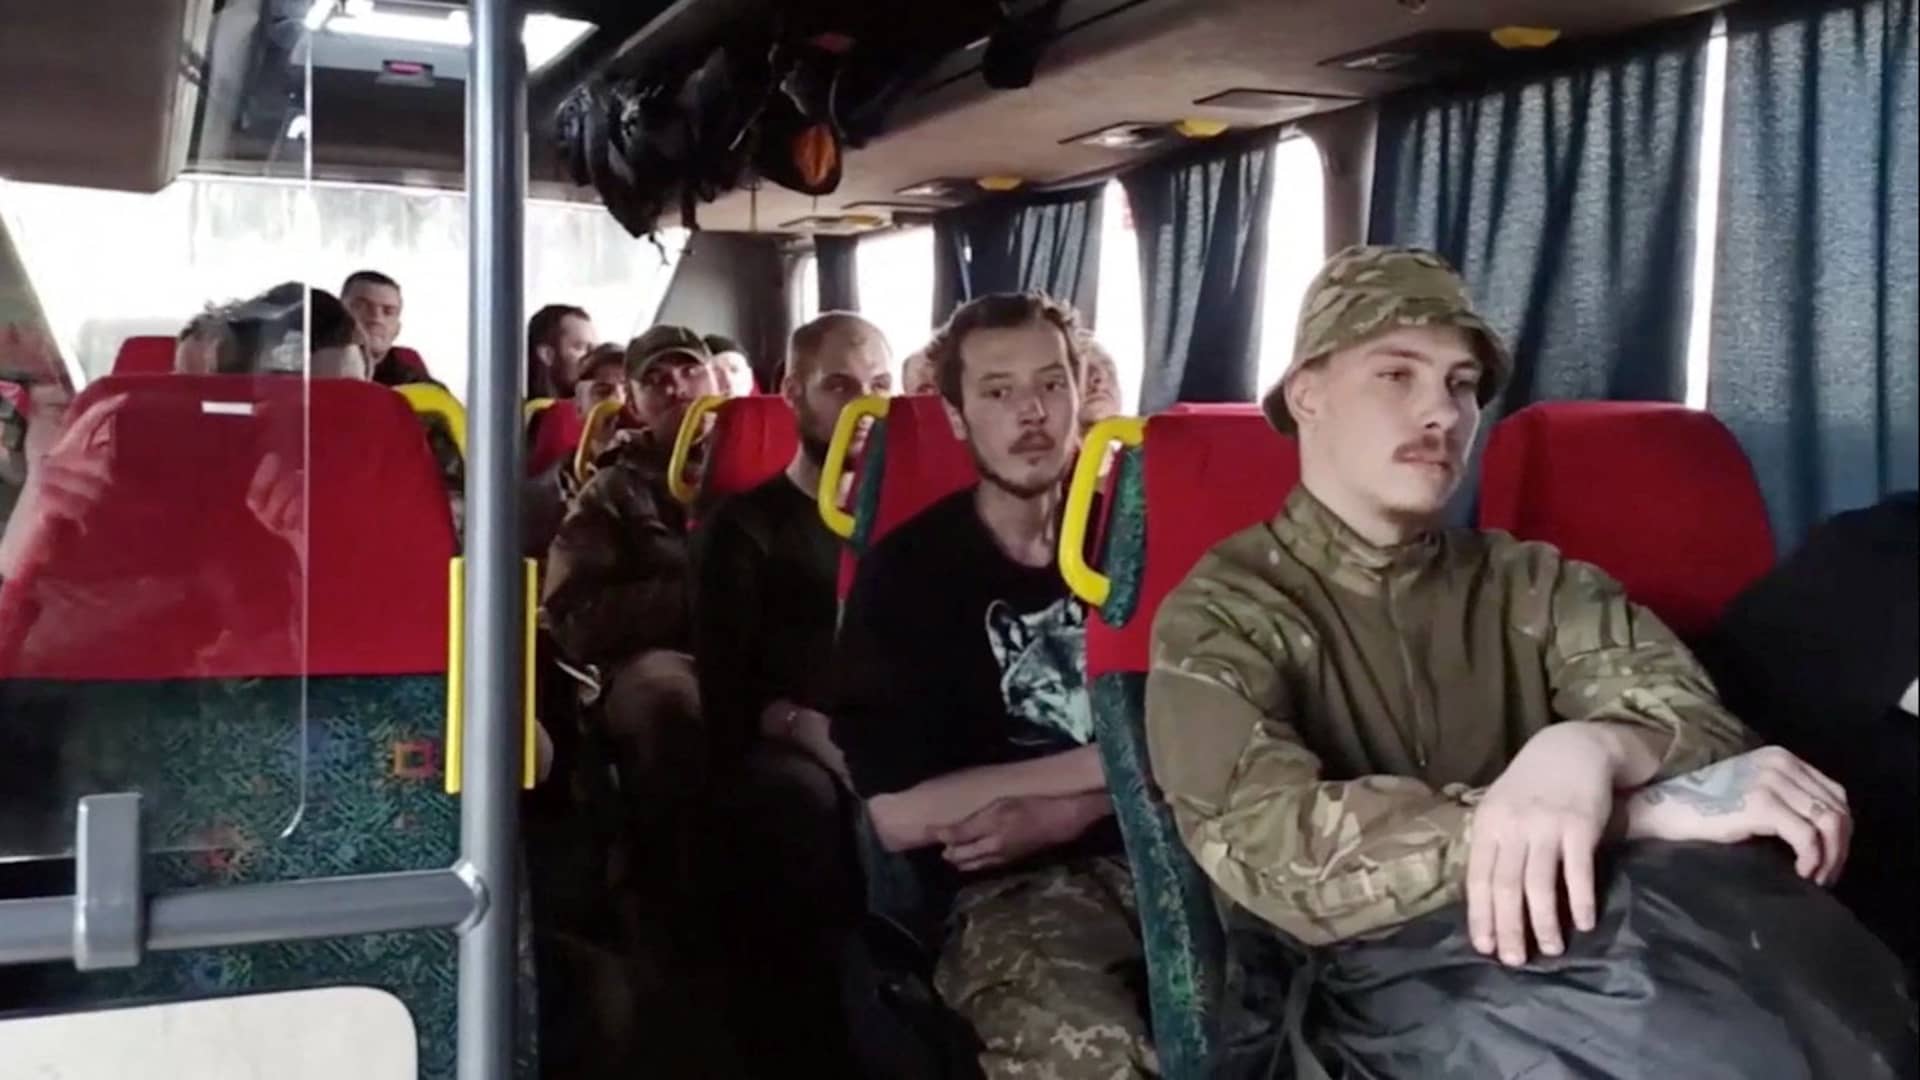 A still image taken from a video released by Russian Defence Ministry shows what it claims are service members of Ukrainian forces, who left the besieged Azovstal steel plant, sitting inside a bus in Mariupol, Ukraine. Video released May 17, 2022.